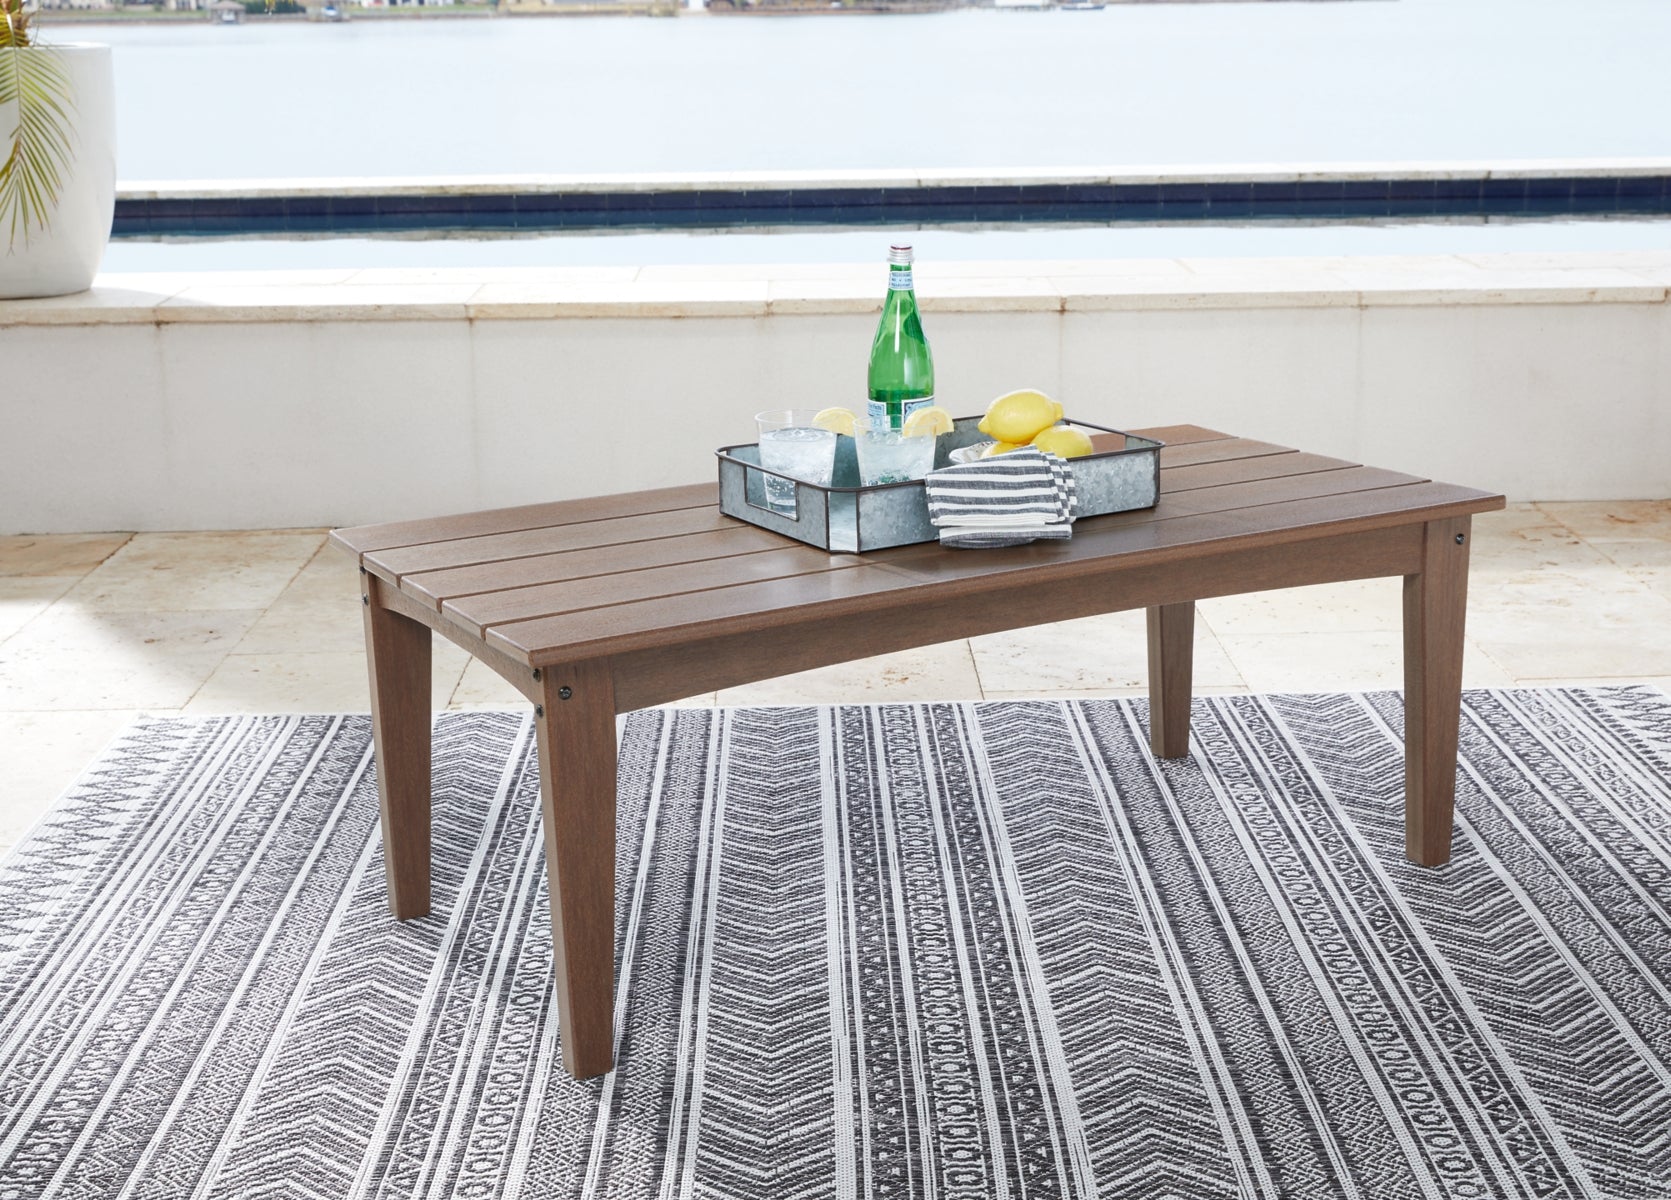 Emmeline Outdoor Coffee Table with 2 End Tables